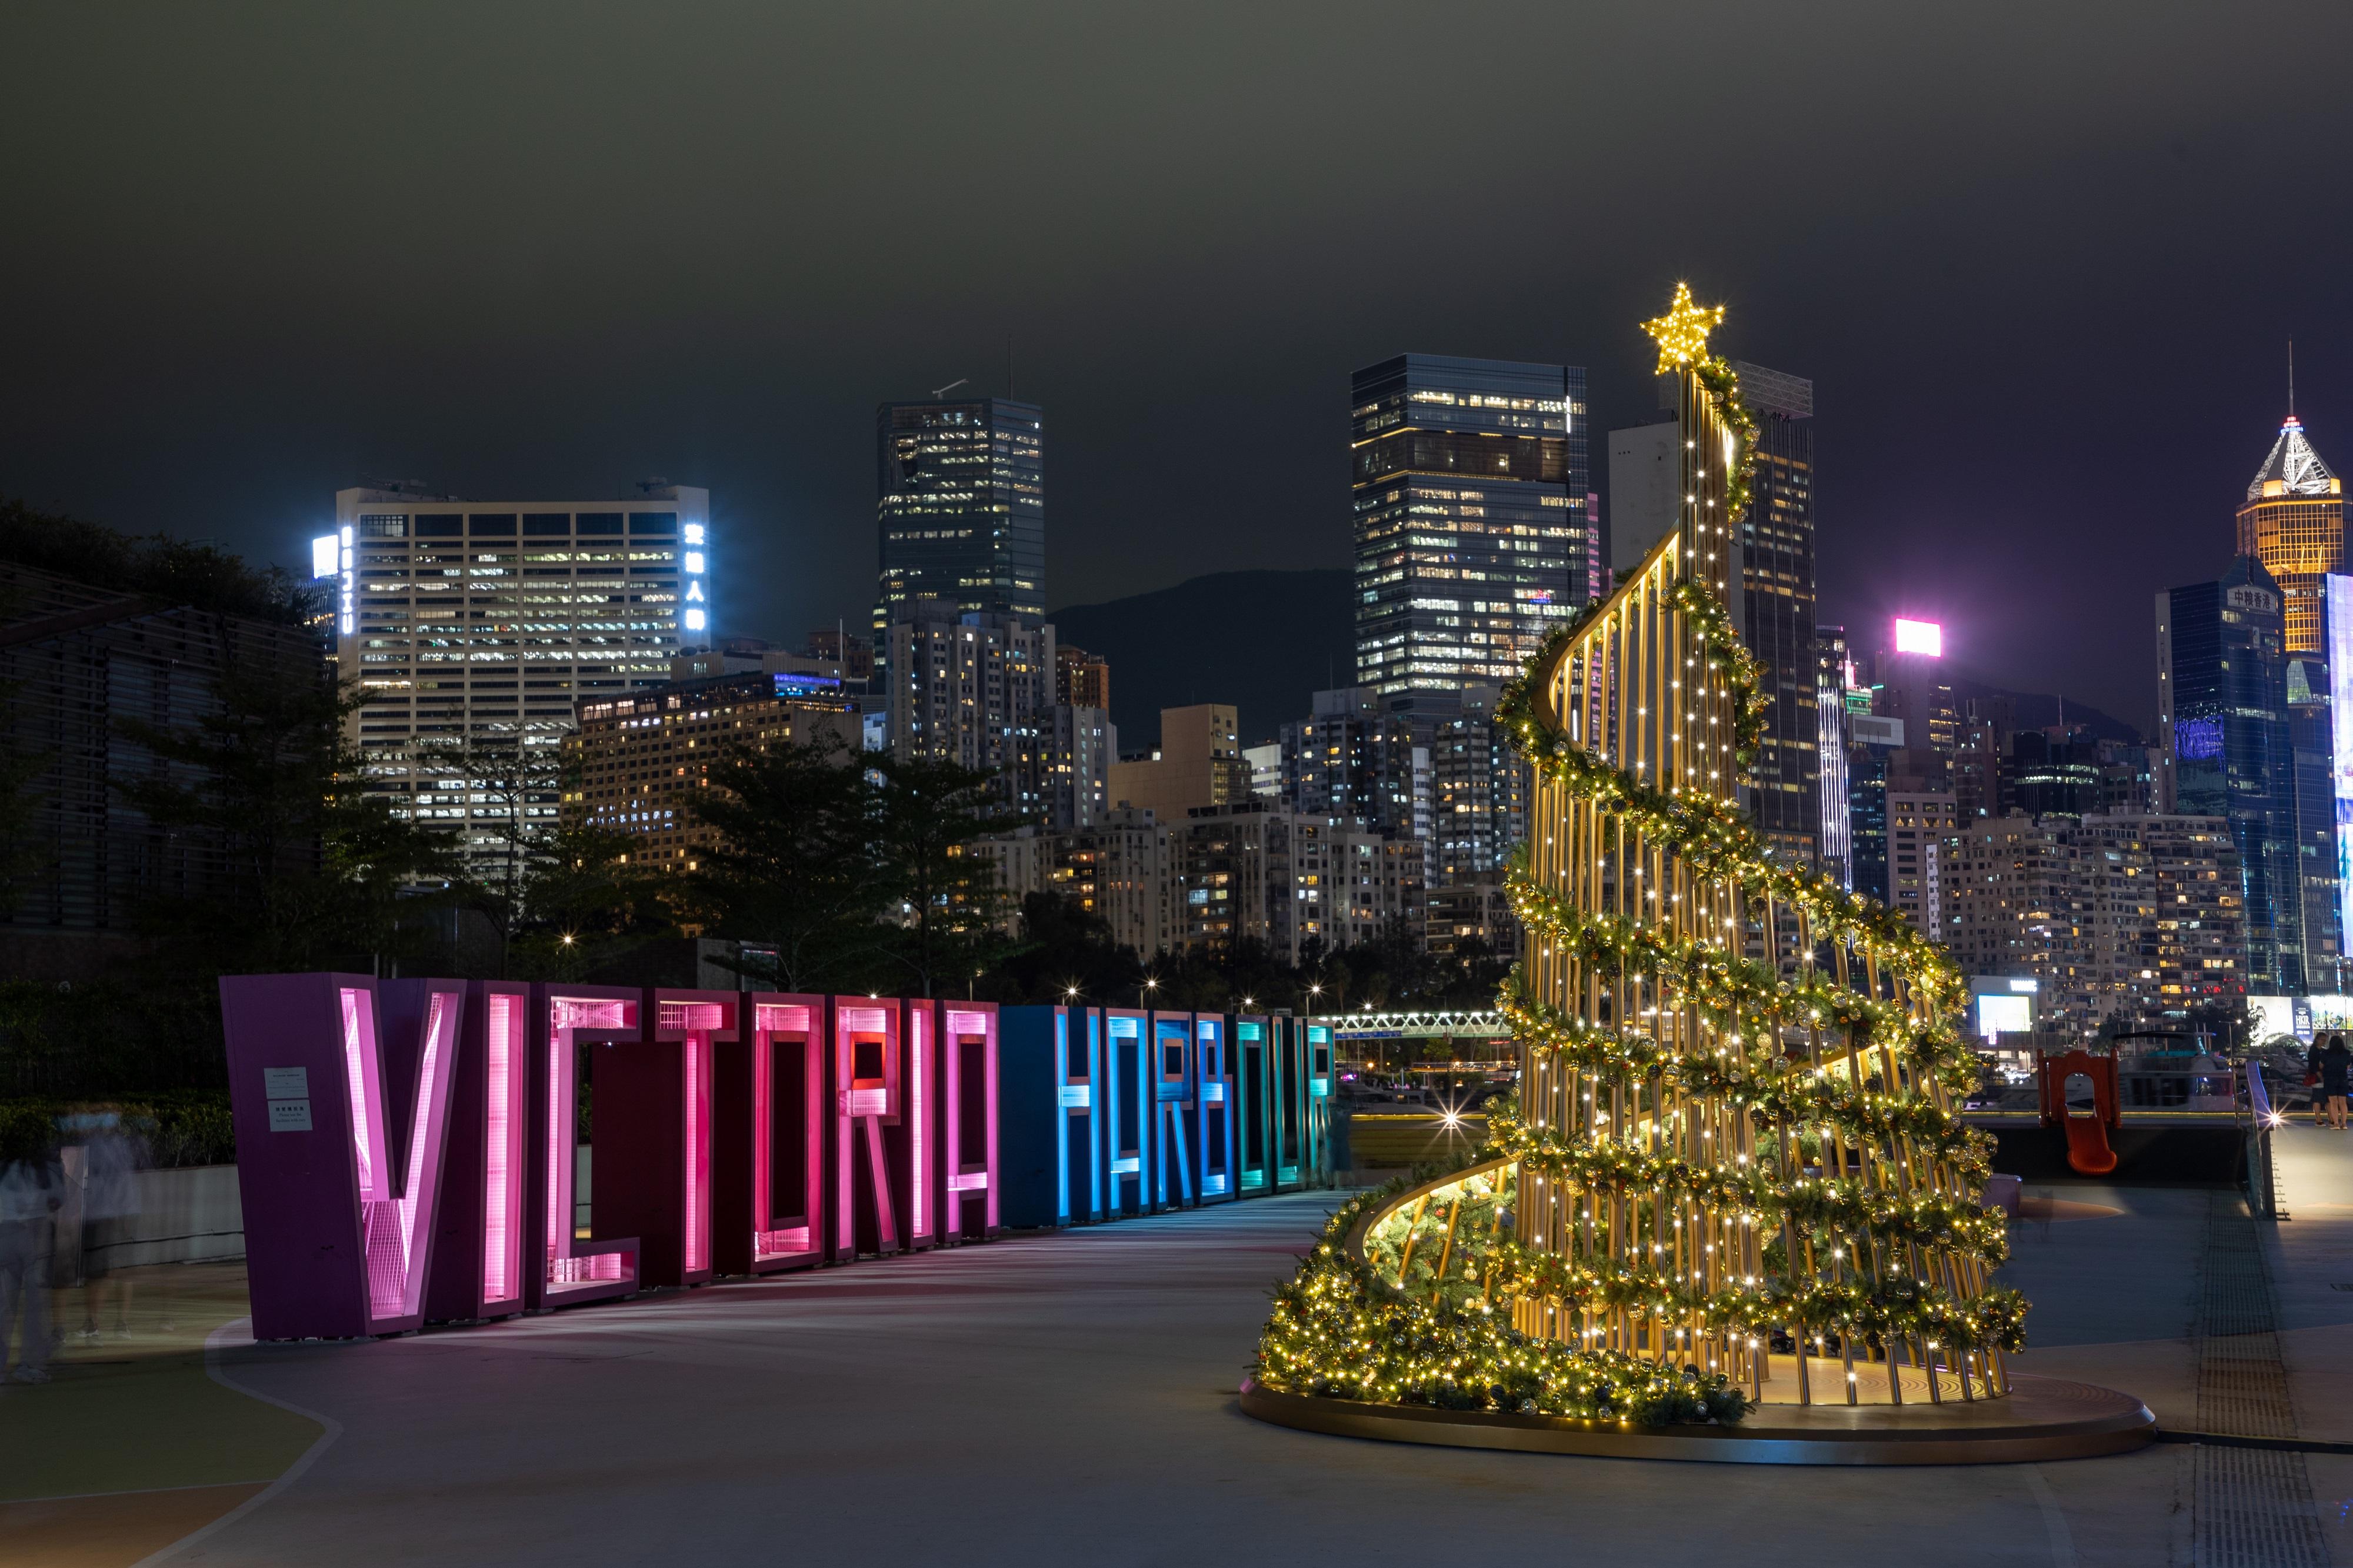 Inheriting the concept of Harbourfront is One and All, Christmas activities this year are held under the theme "Your Show Time" at seven harbourfront sites. Photo shows a Christmas tree with the theme of jazz music at the East Coast Park Precinct in Fortress Hill.